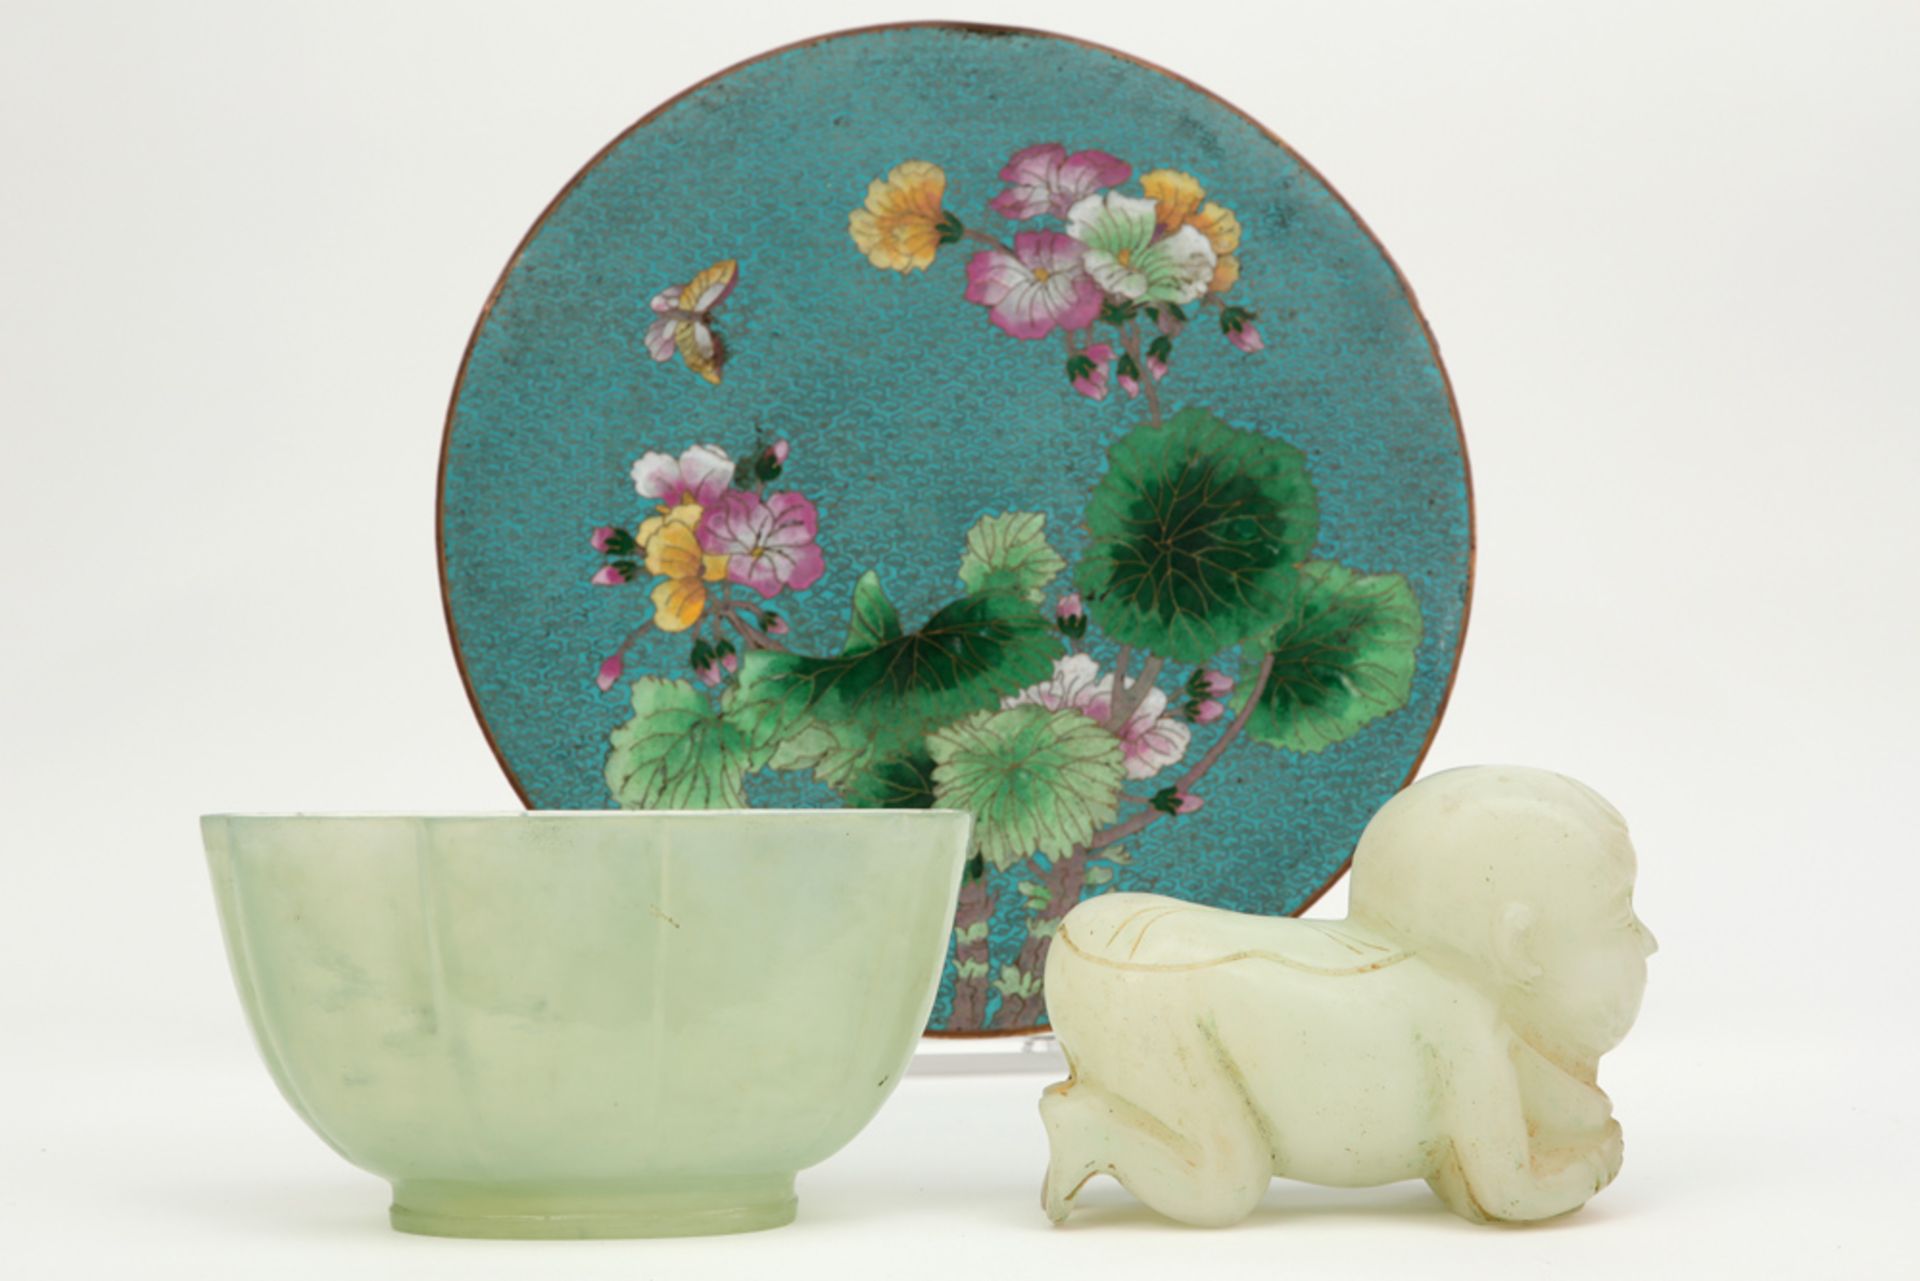 two Chinese jade pieces (bowl and baby figure) and a round cloisonné plate || Lot (3) met een kom en - Image 4 of 4